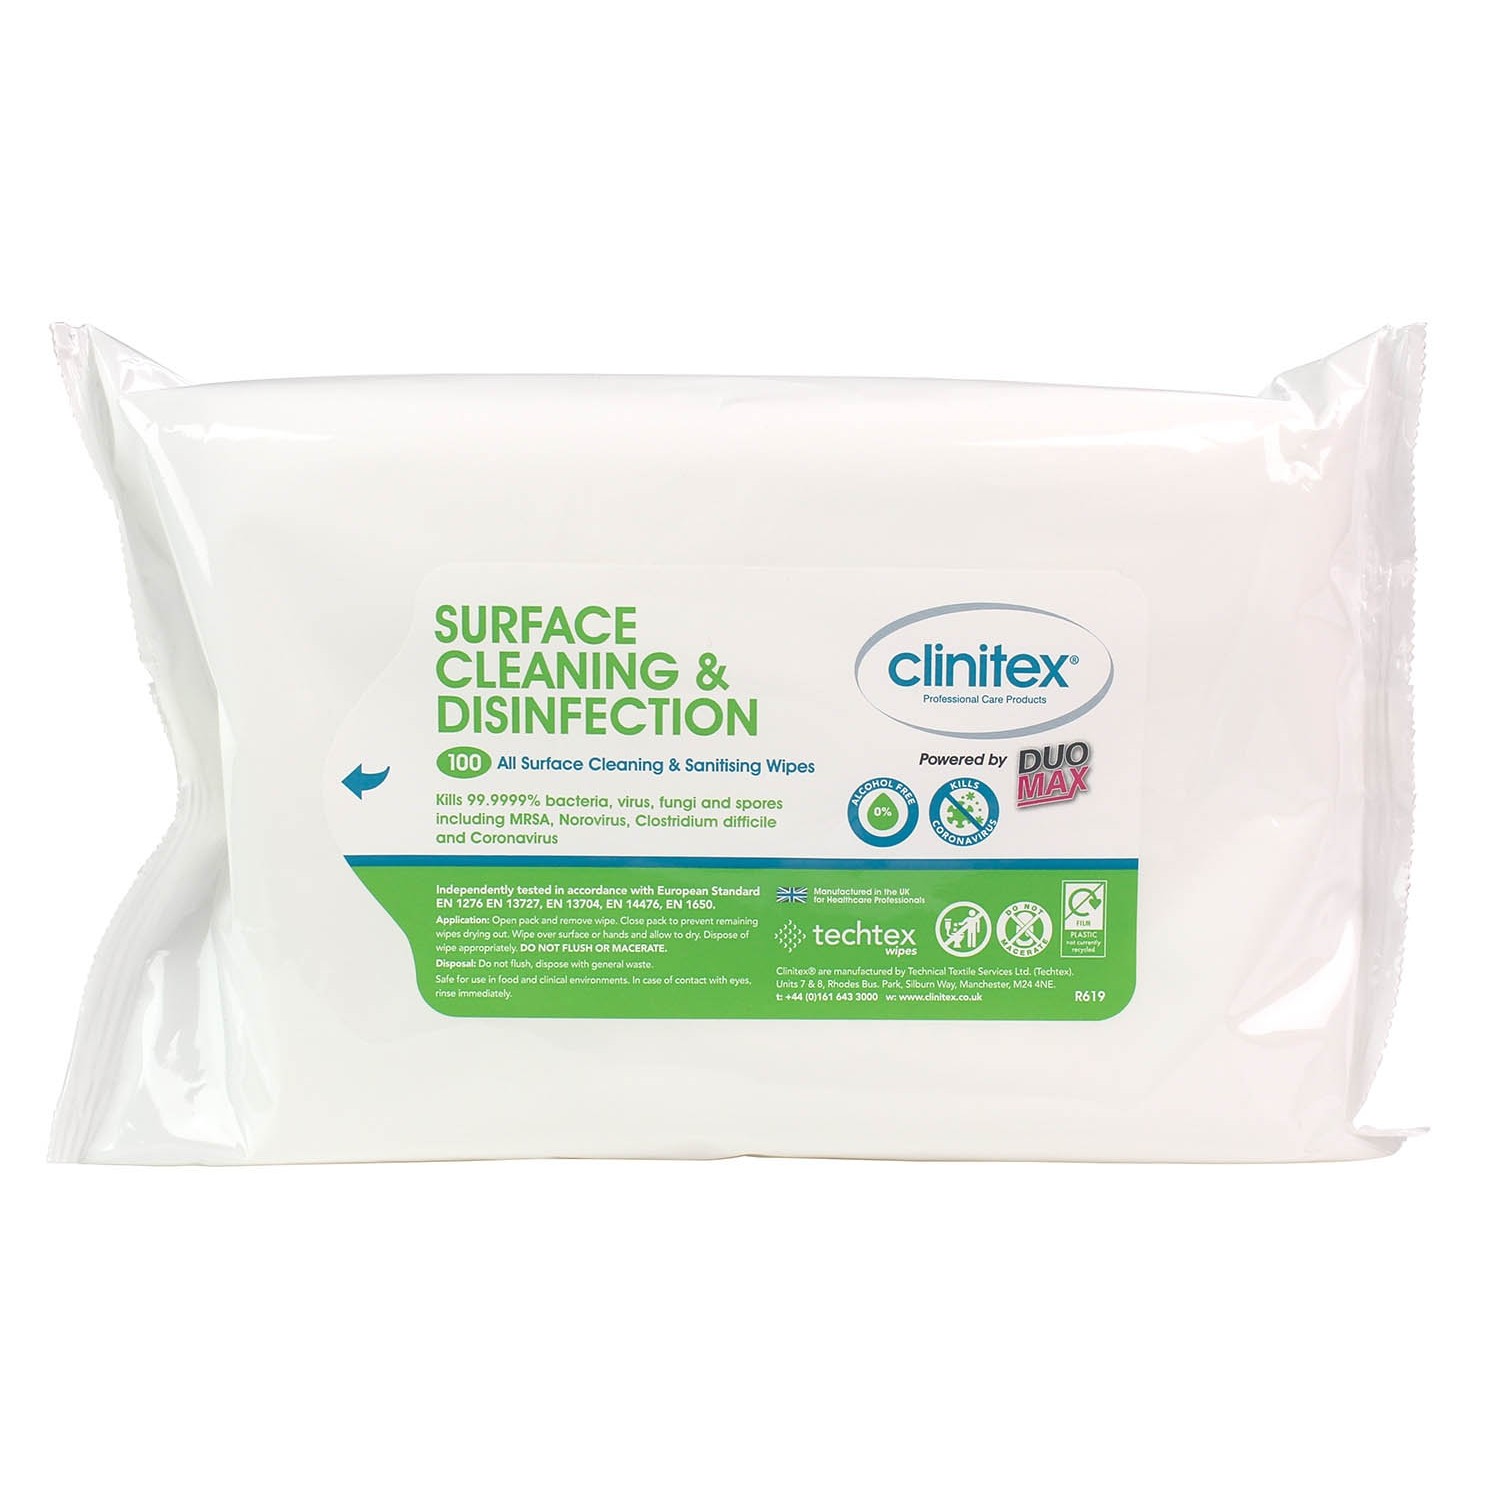 Clinitex Surface Disinfection Wipes x100